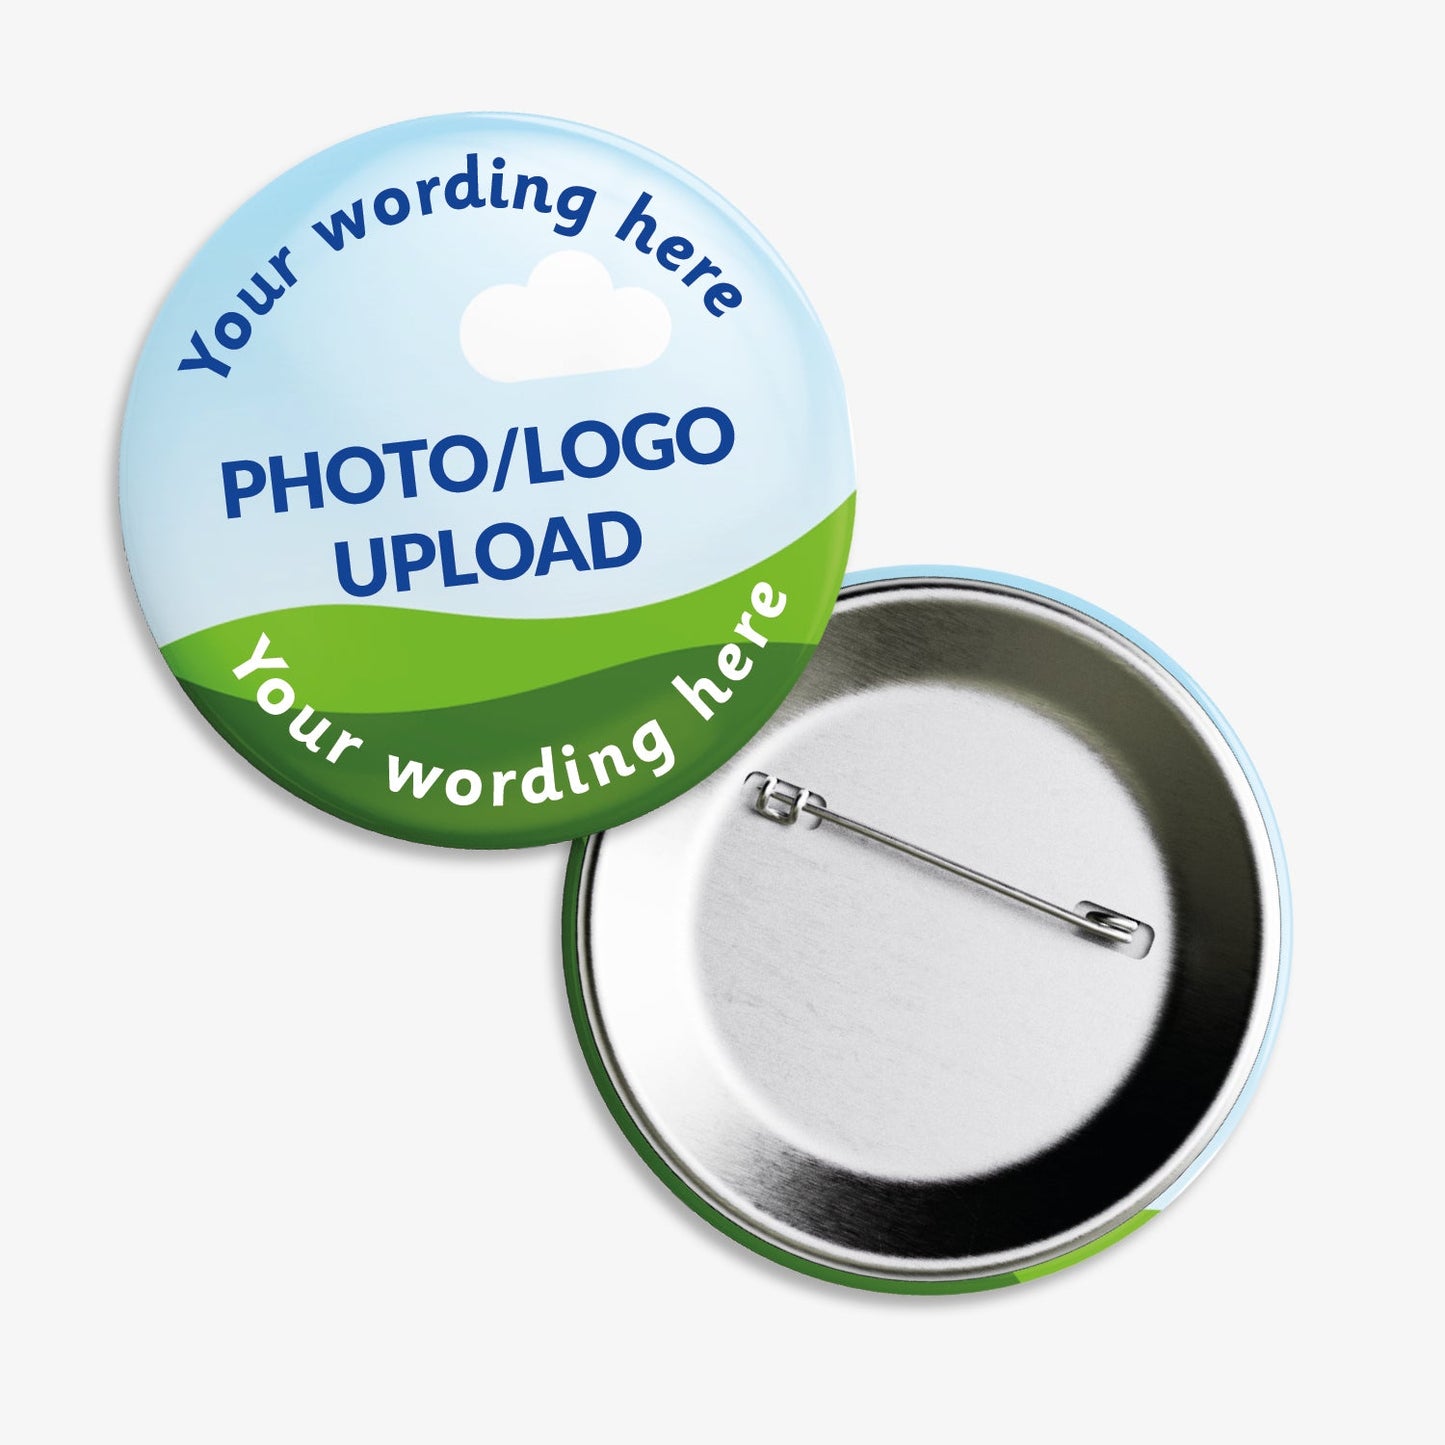 10 Personalised Upload Your Own Image Badges - 38mm